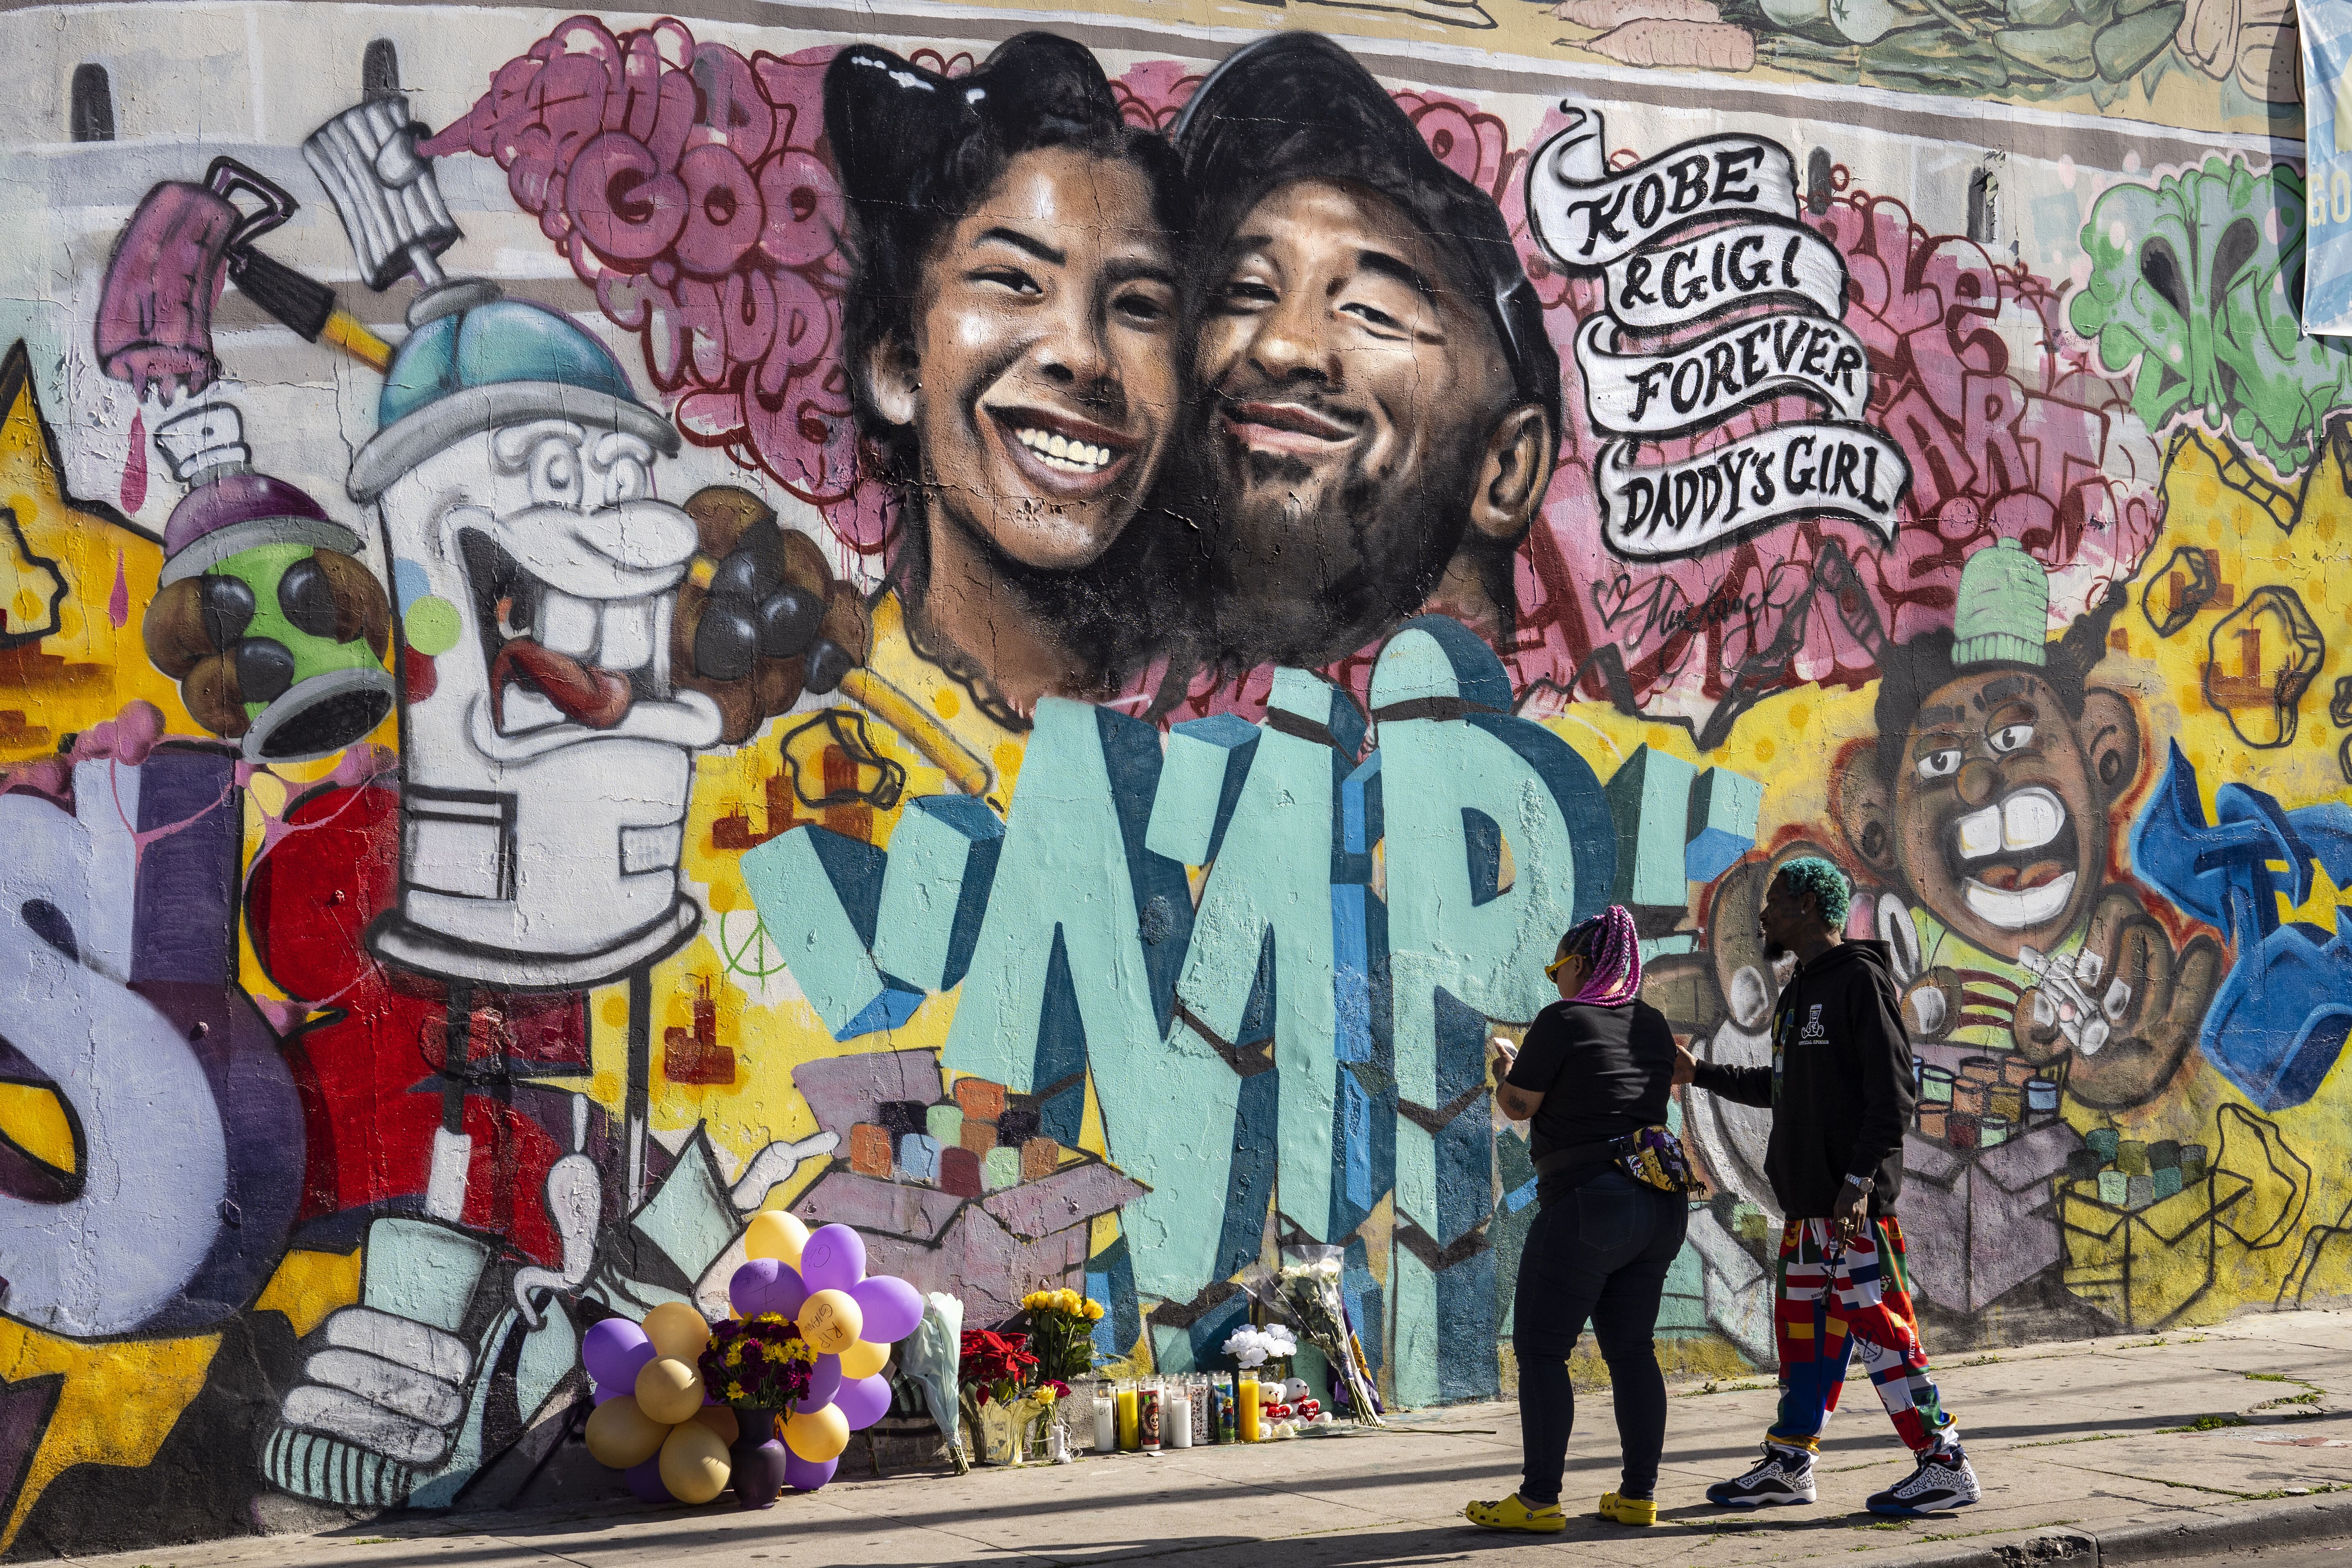  Mural by the artists Muck Rock and Mr79lts showing Kobe Bryant and his daughter Gianna Bryant/ Source: Getty Images